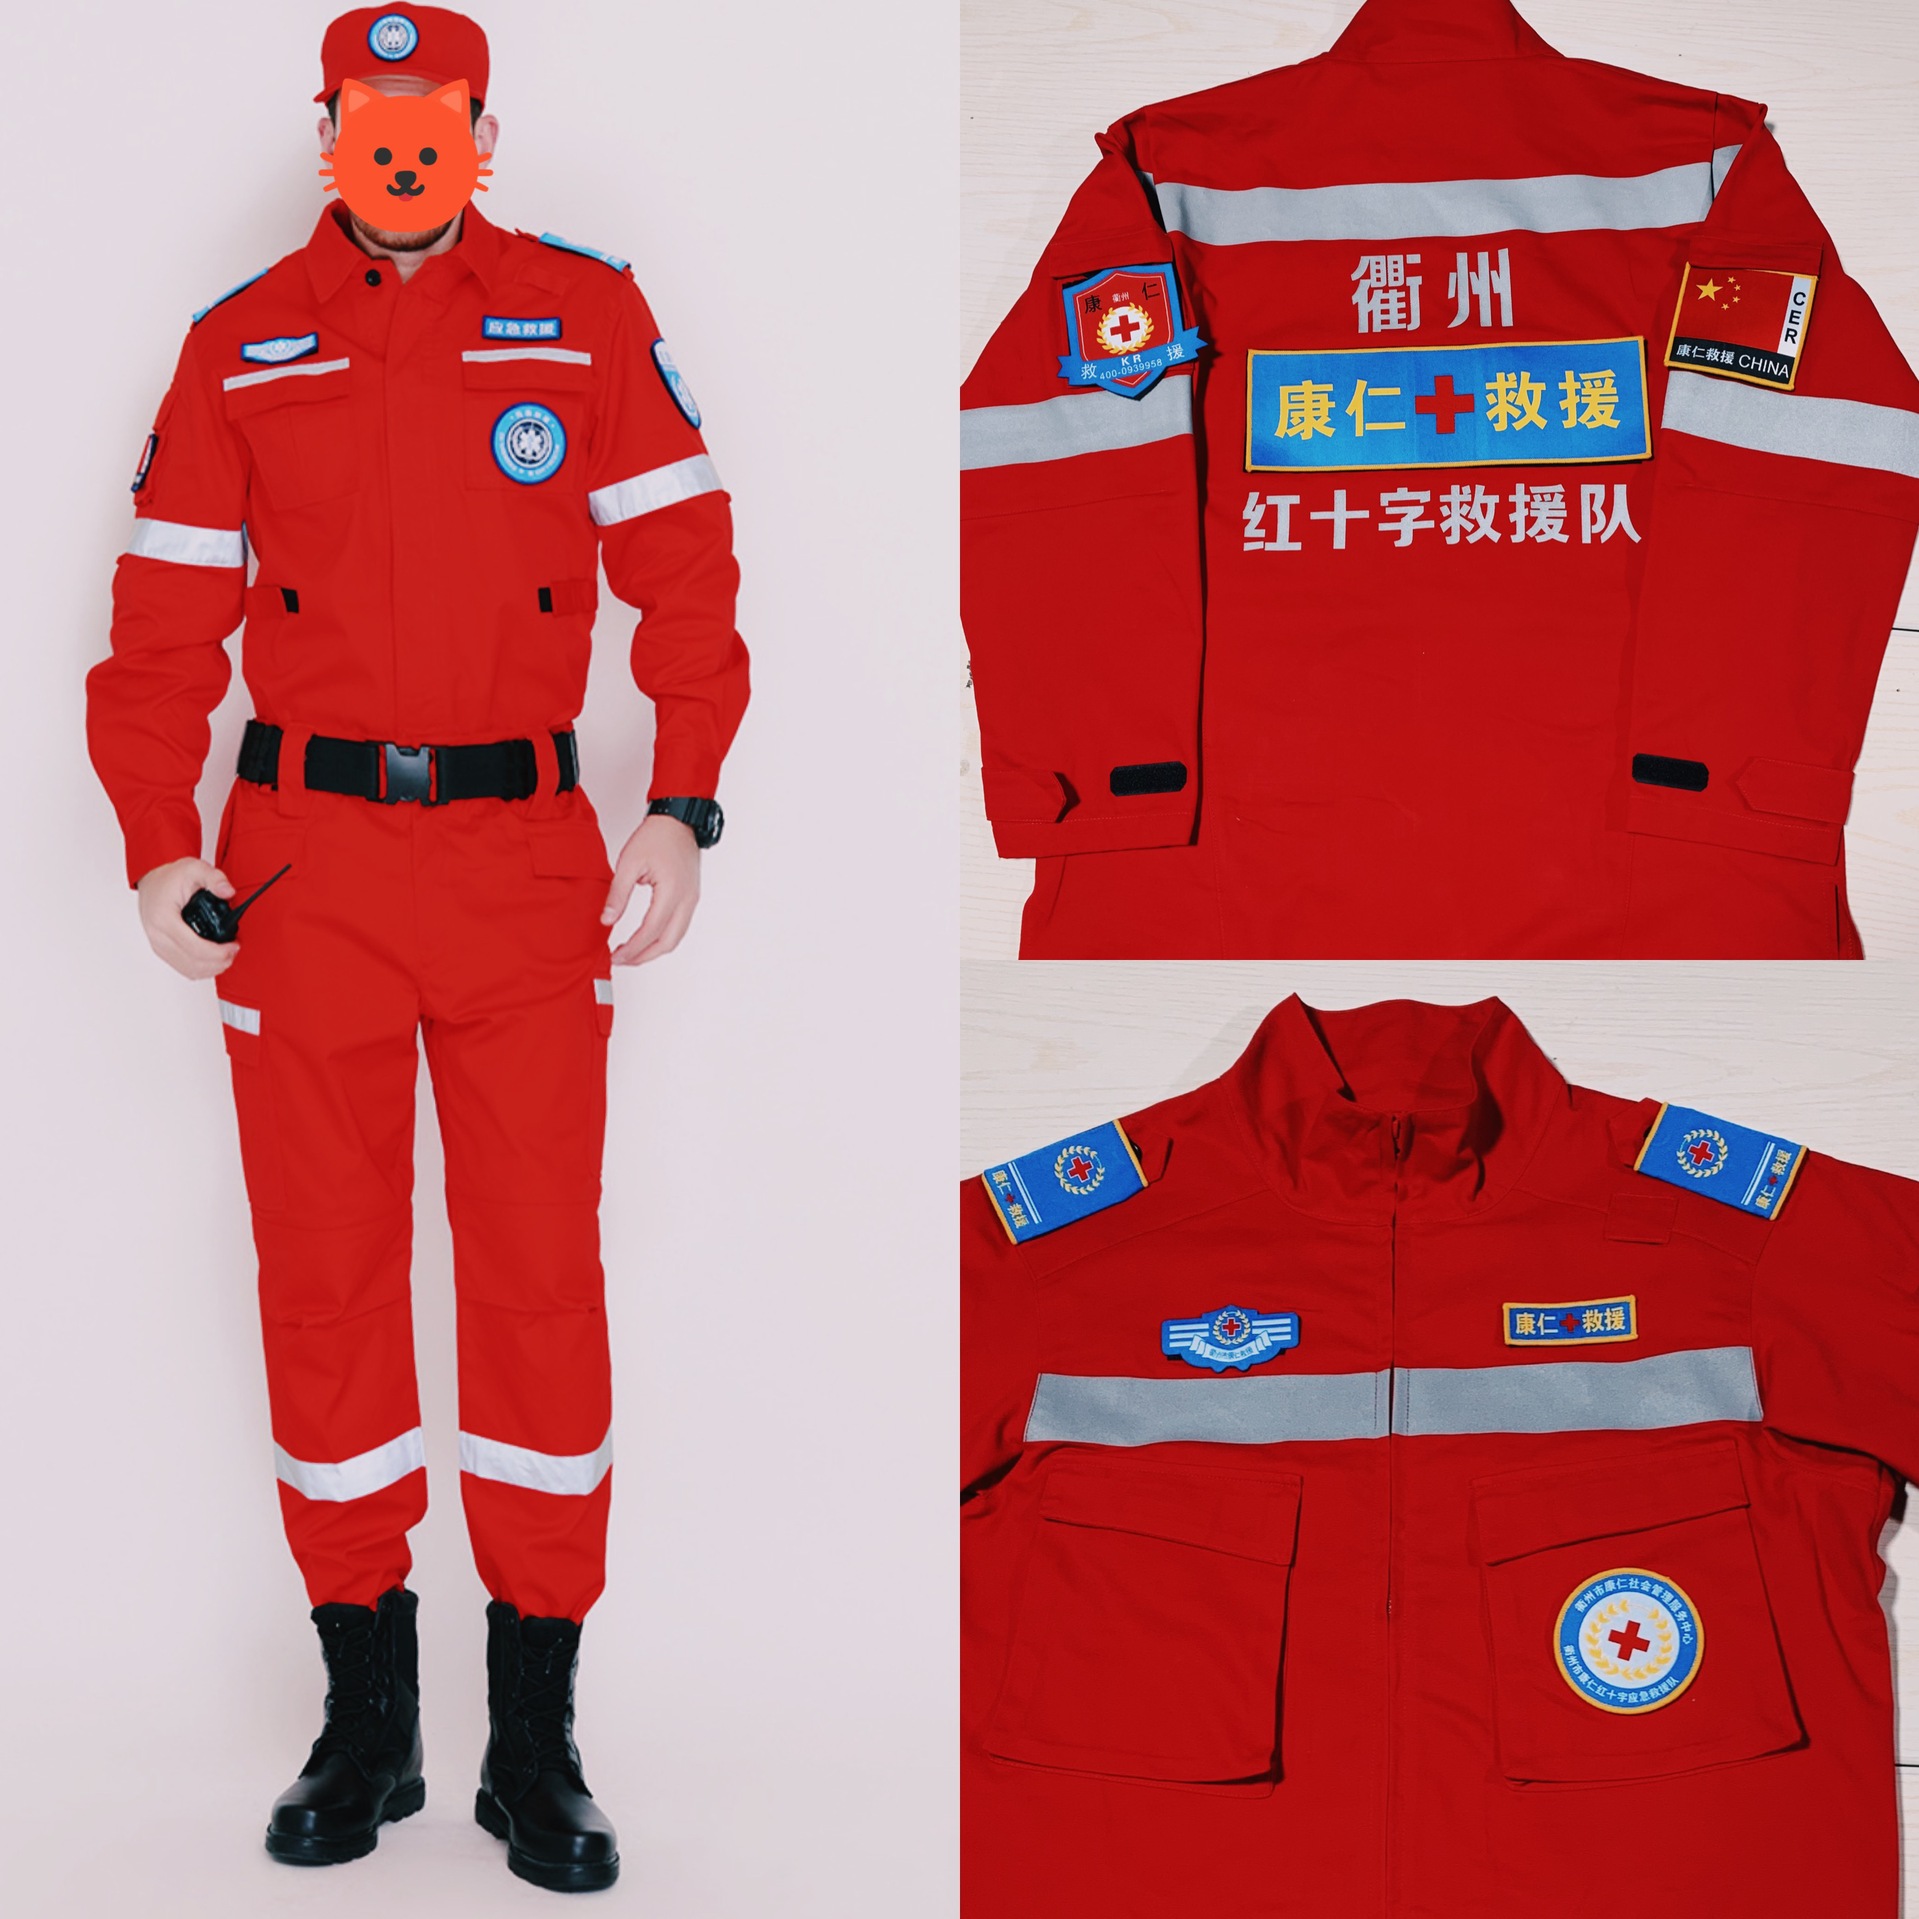 new pattern outdoors Meet an emergency rescue Training clothes suit Batch machining customized spring and autumn summer Anti-static uniform